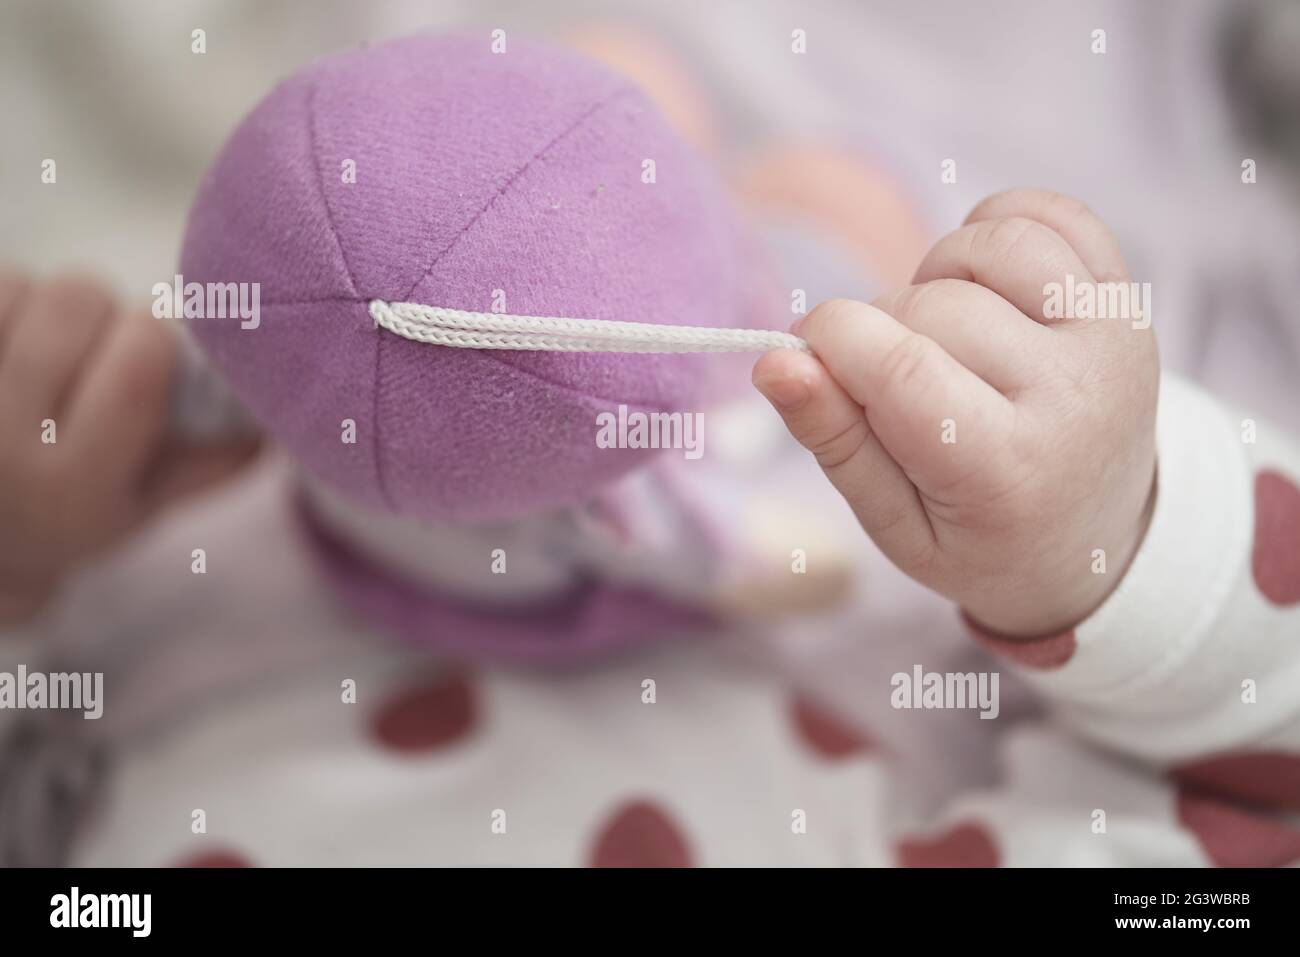 Cute little baby playing with hands and smiling Stock Photo